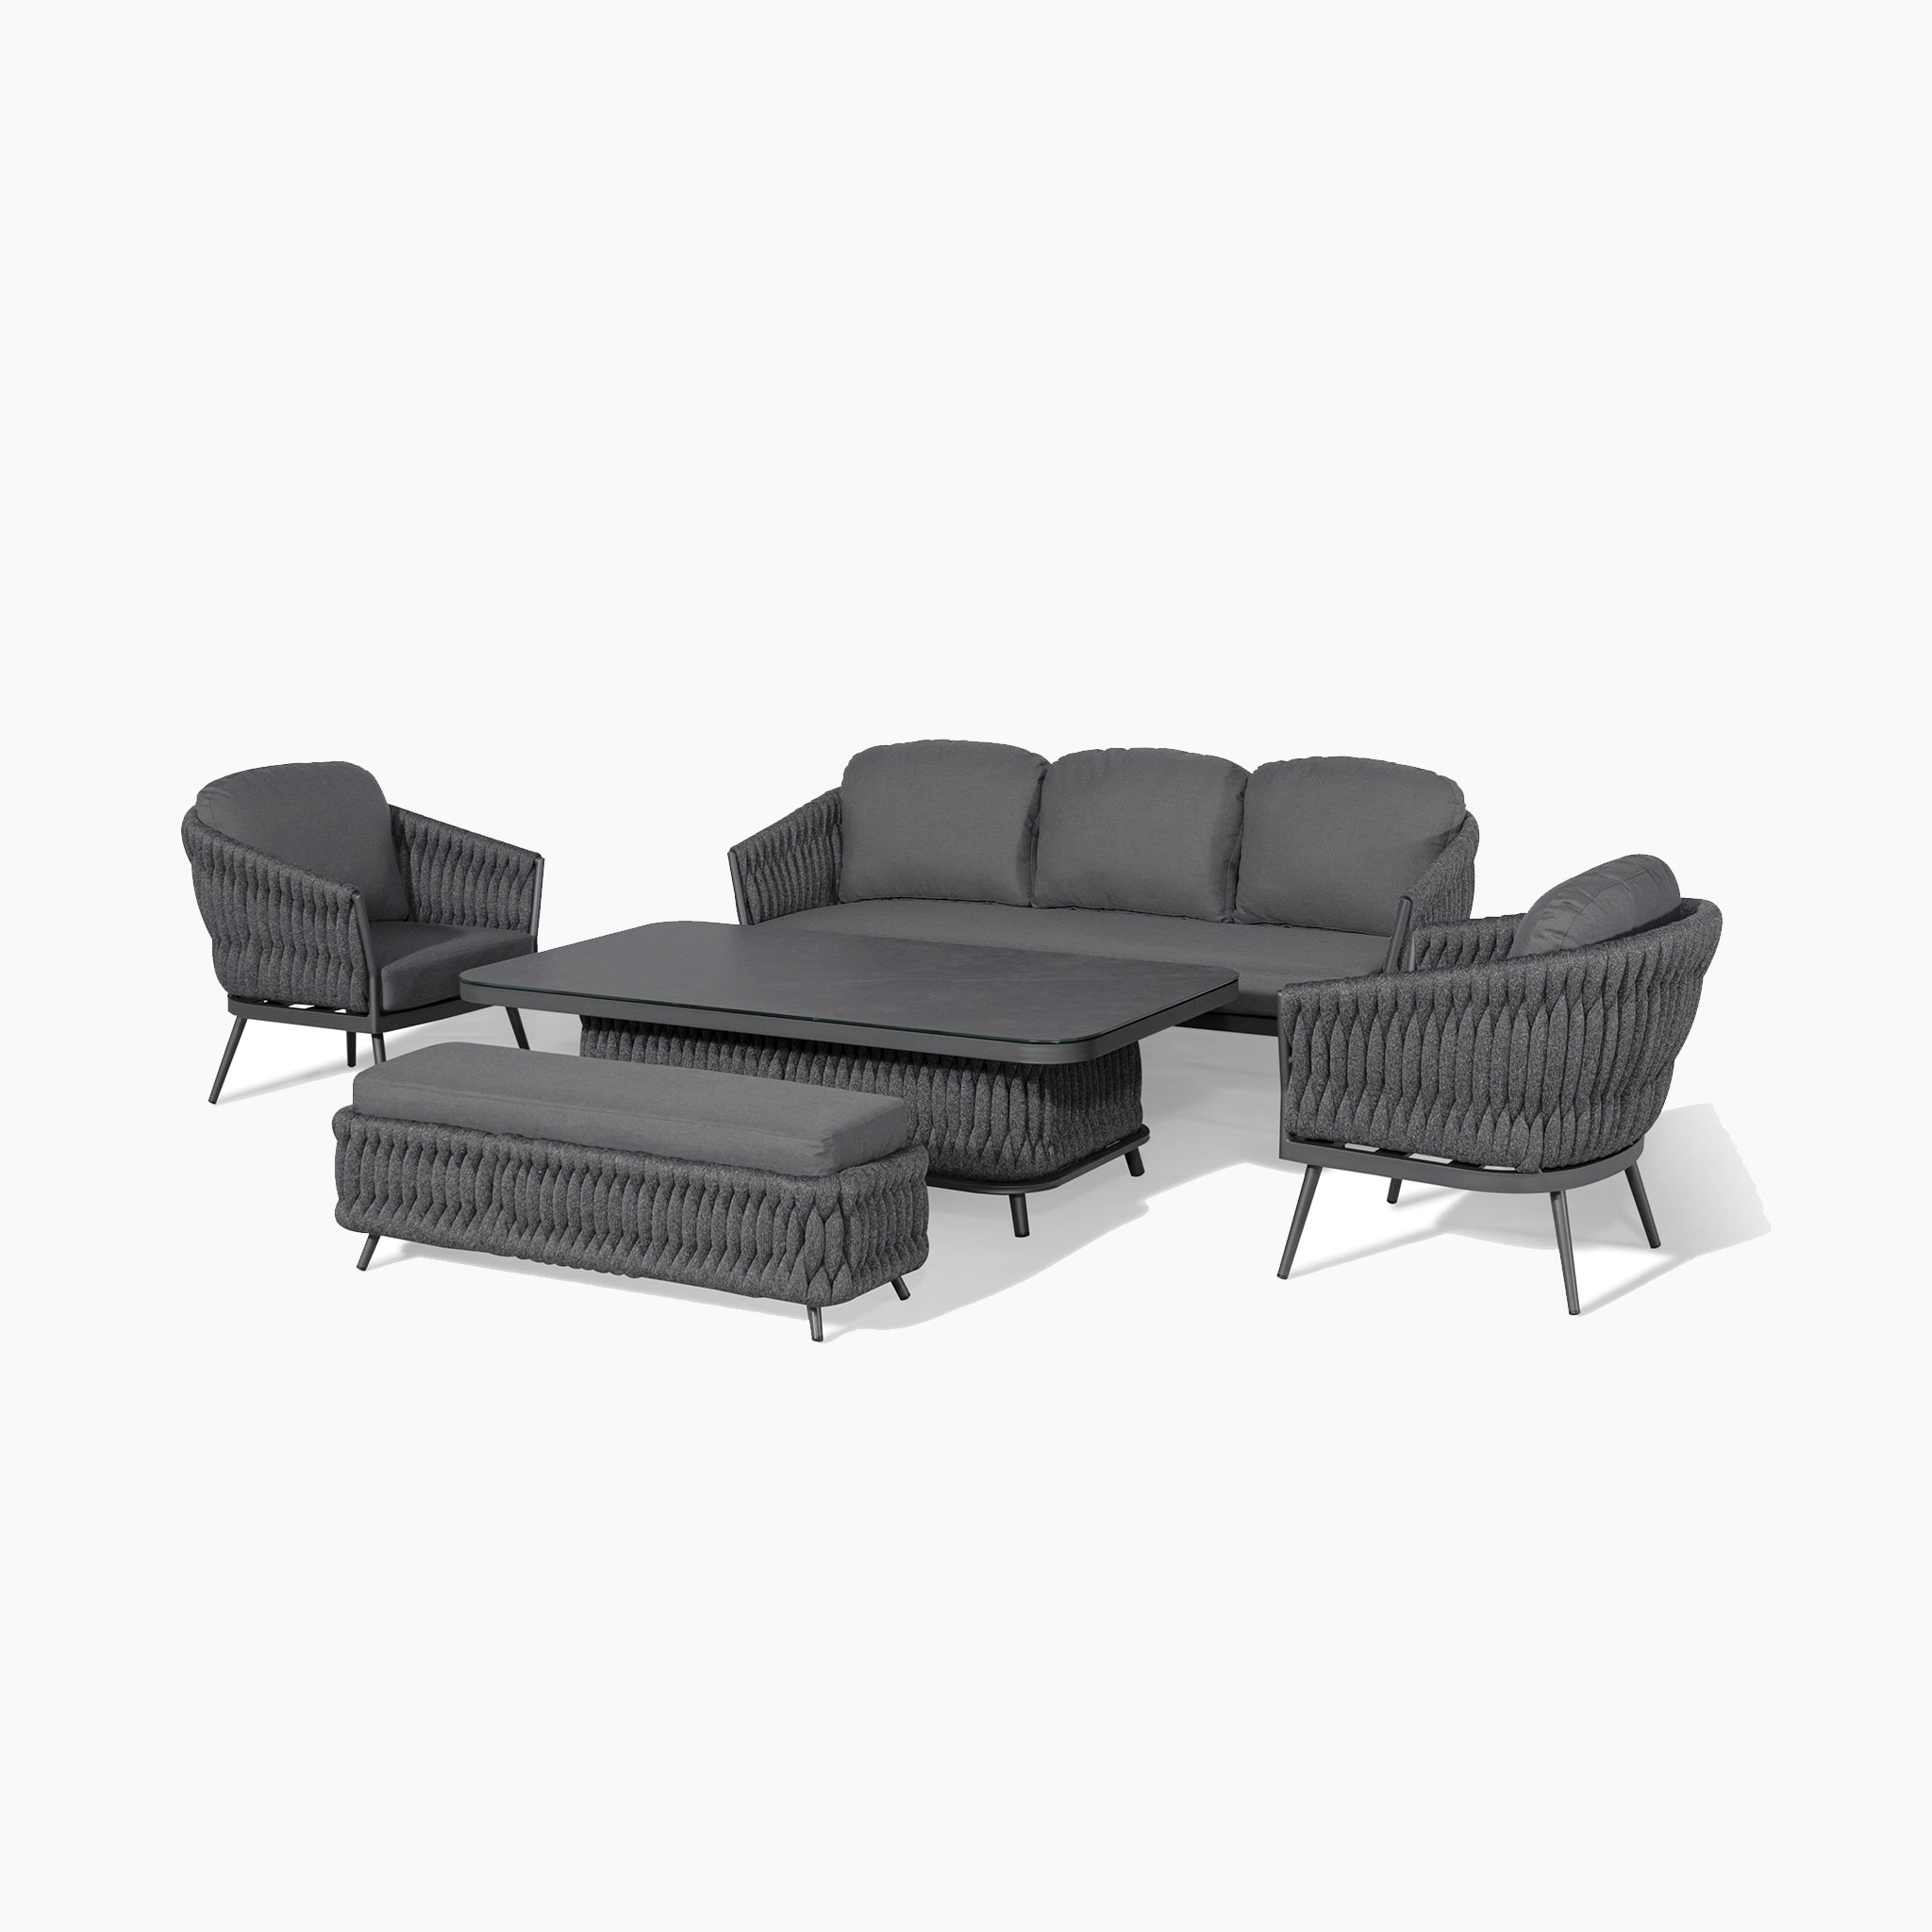 Palma 3 Seat Rope Sofa Set with Rising Table in Grey